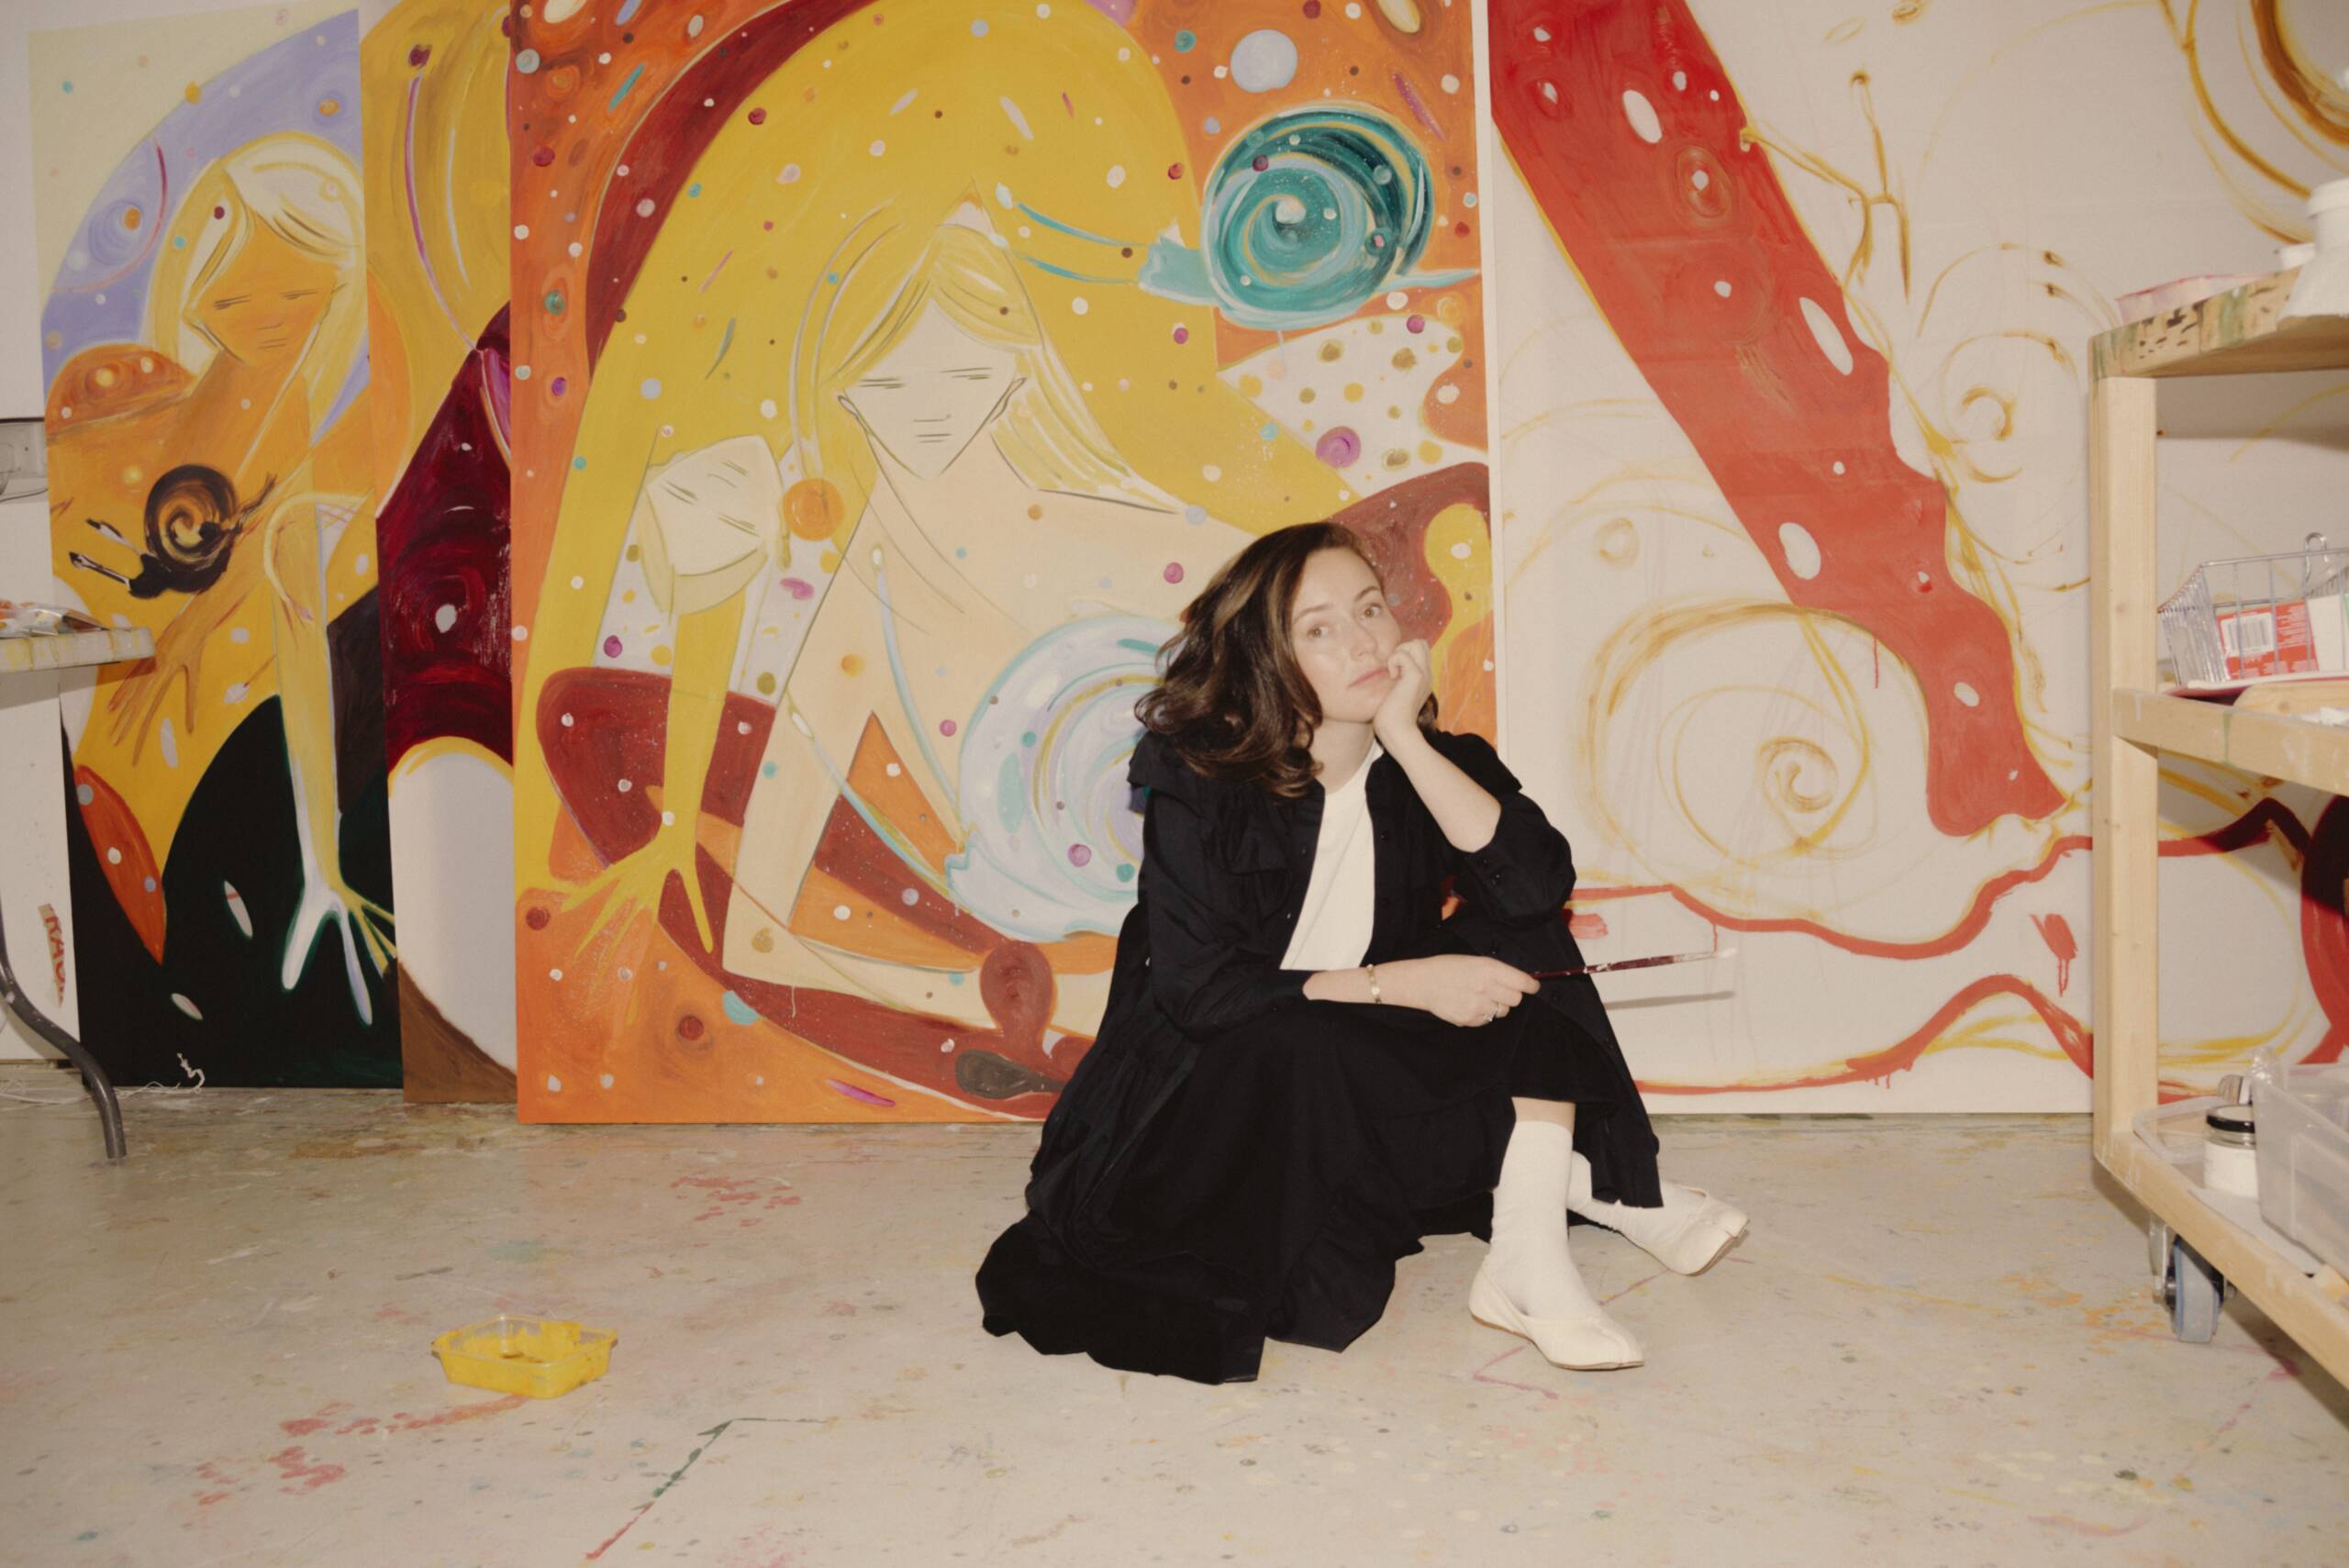 Woman sitting on the ground in front of colourful painting